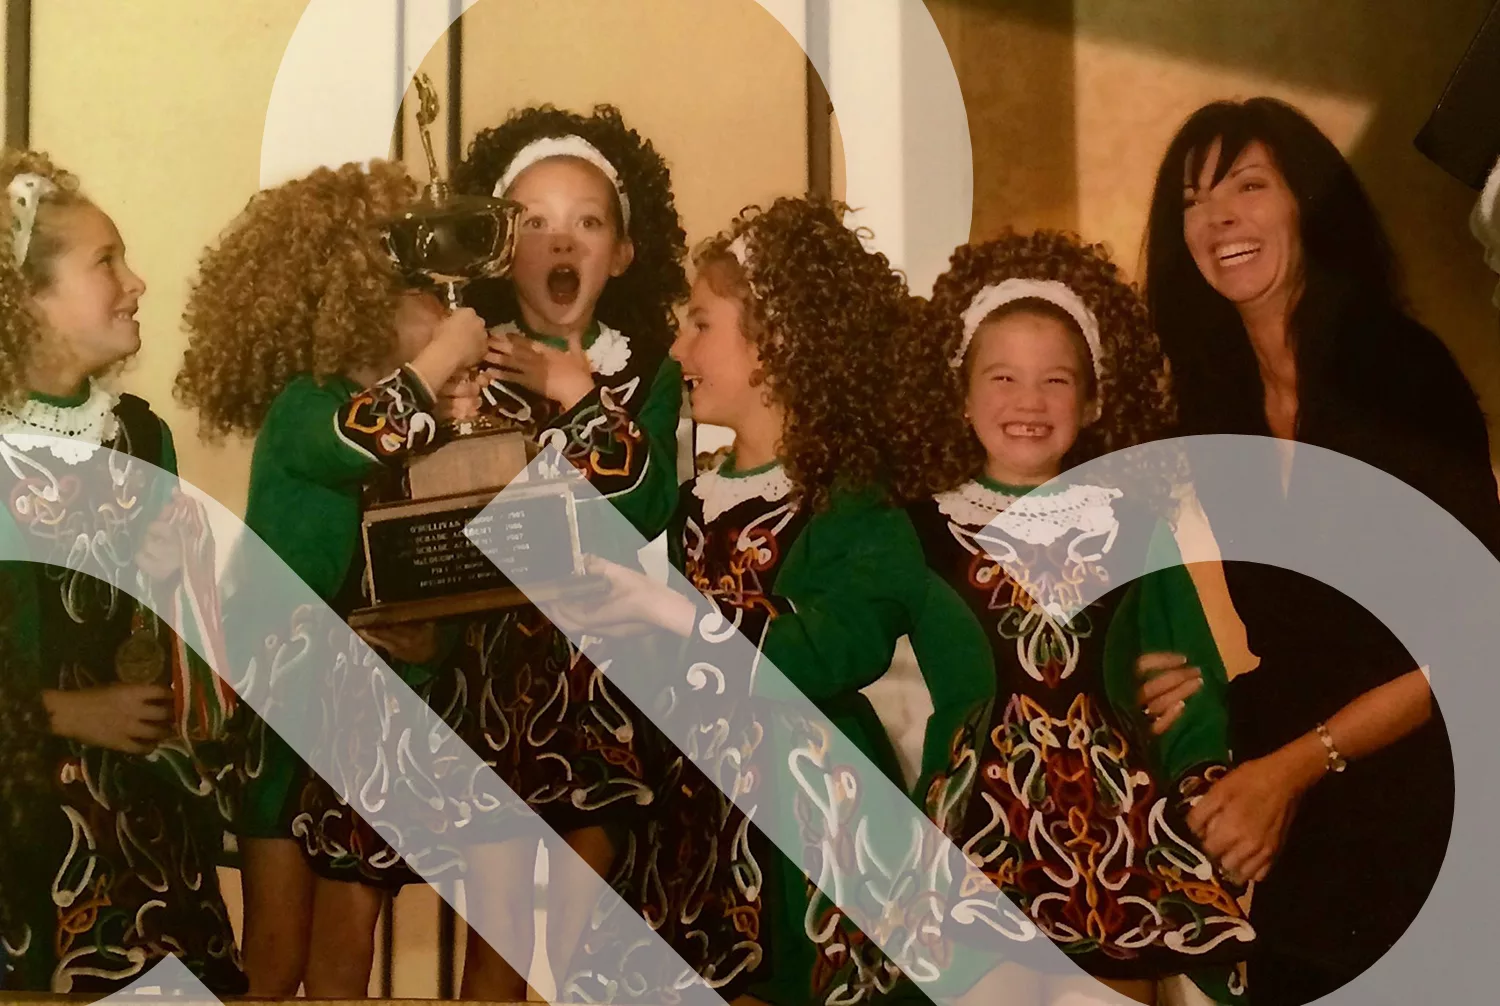 An image from IDTANA's history with several girls in ceili dresses screaming while holding a perpetual trophy. The IDTANA logo is interwoven through.